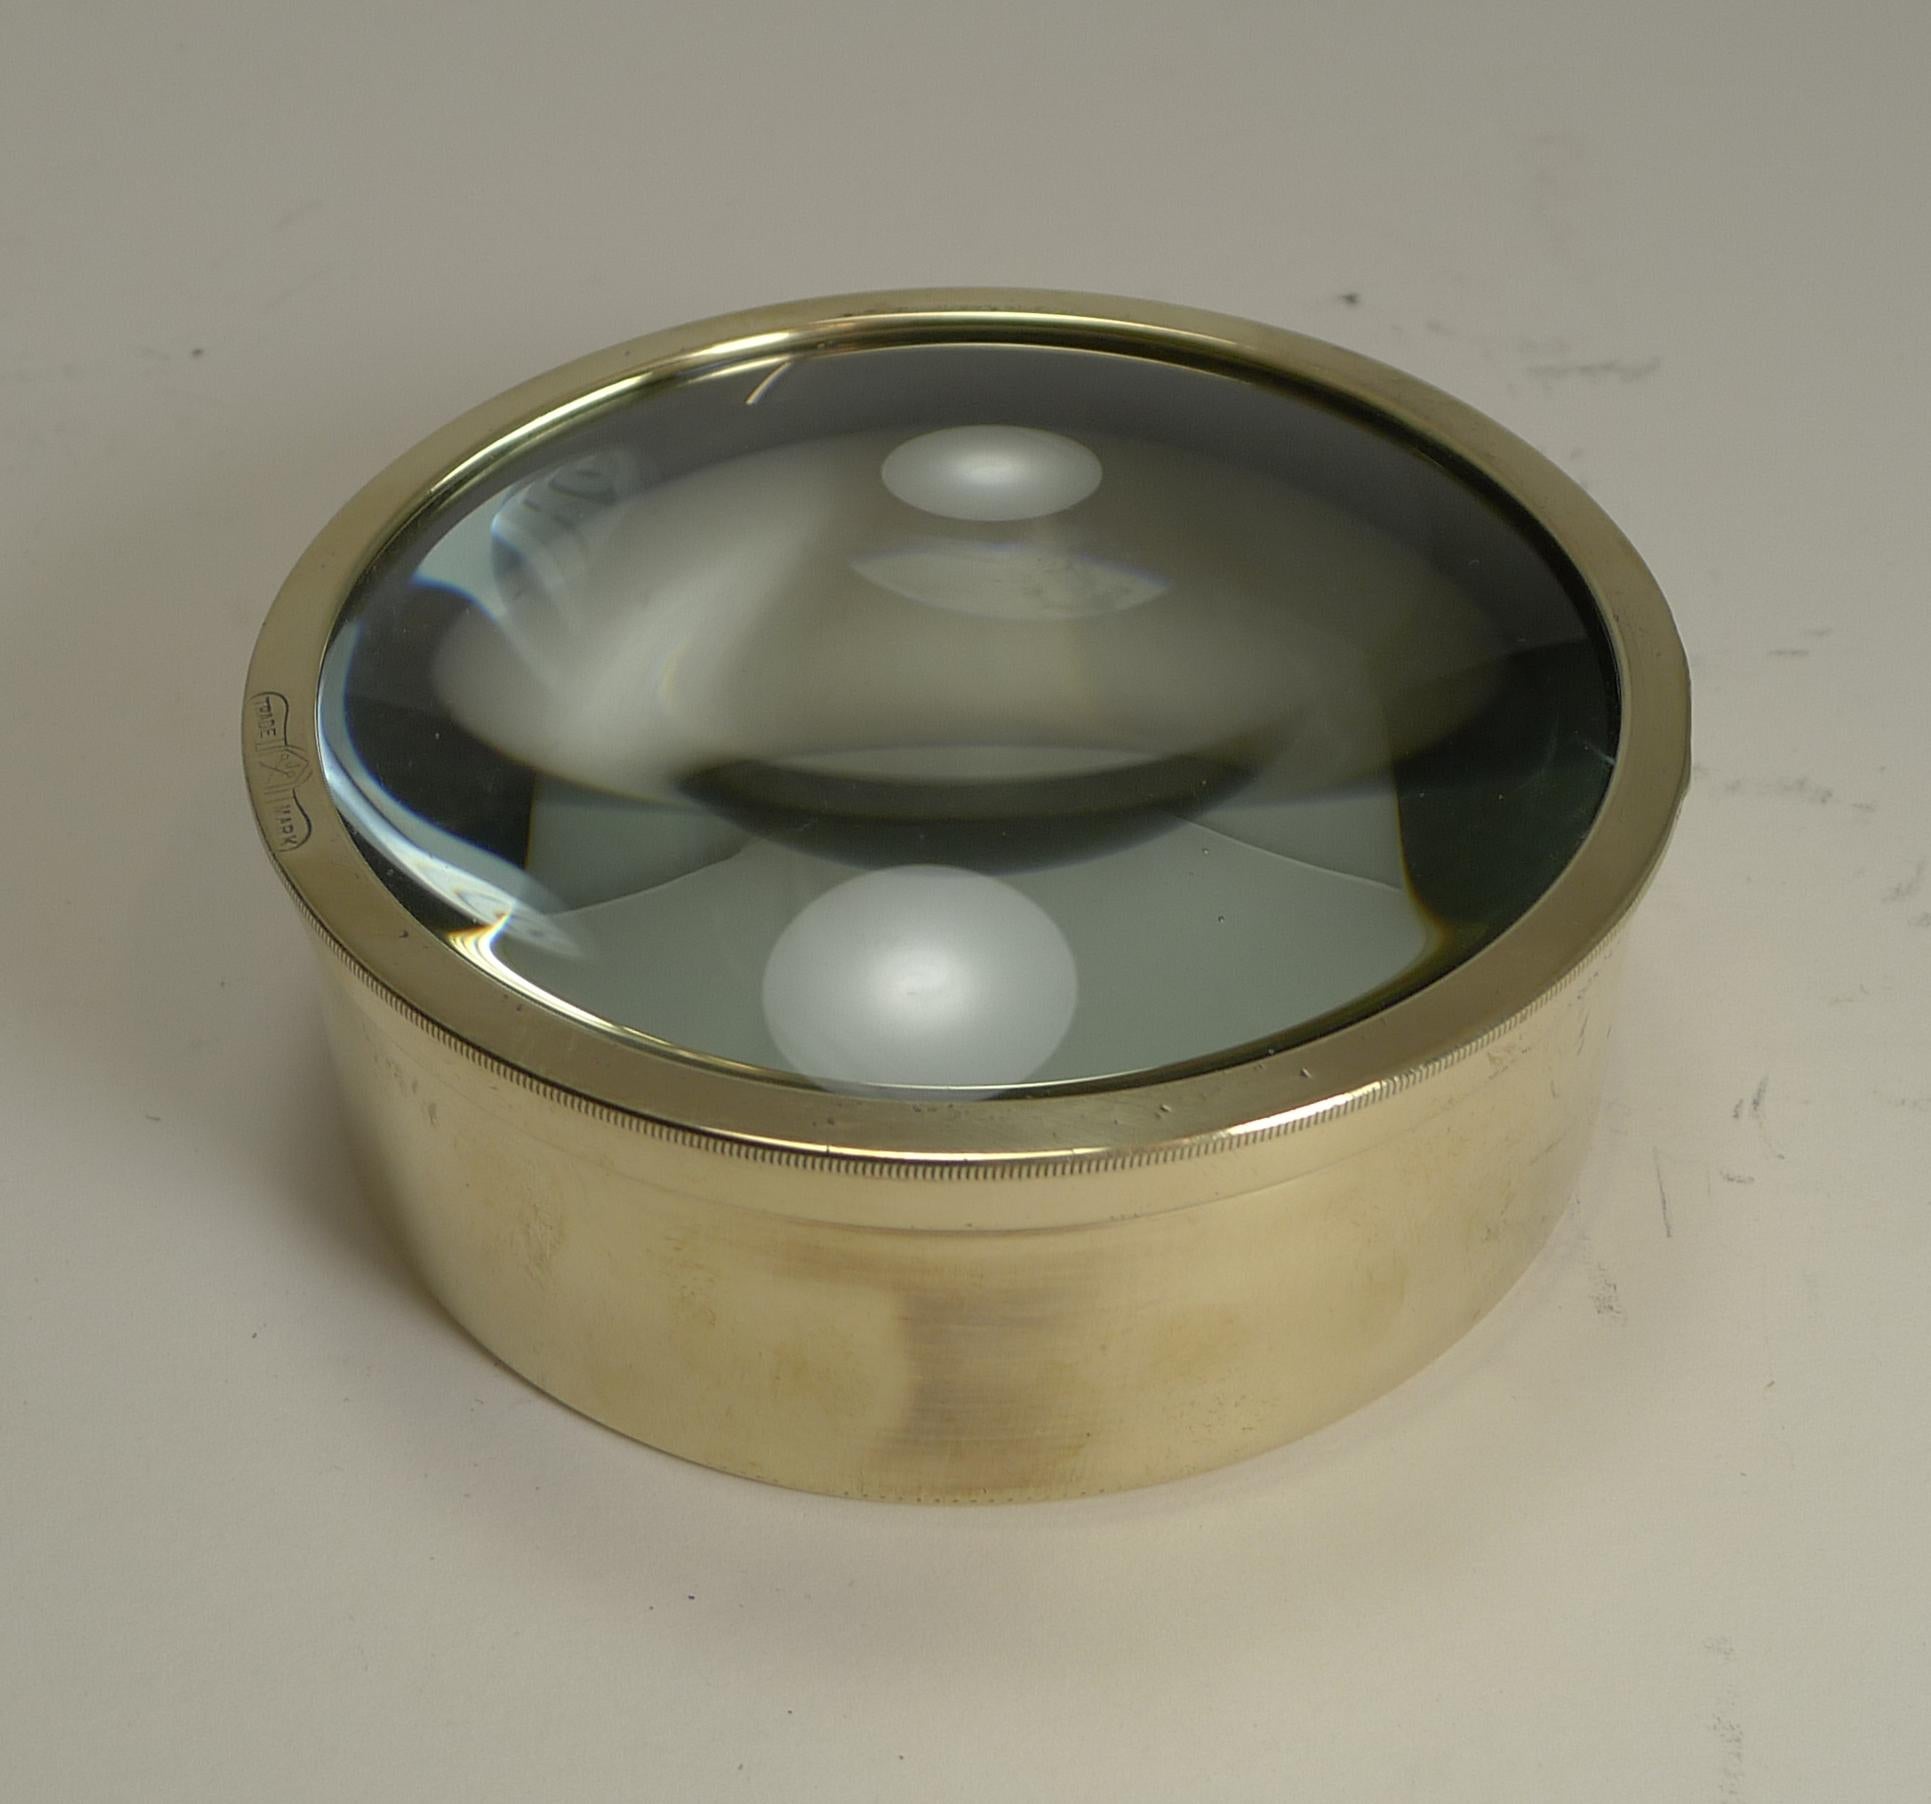 Always very popular and a very useful desk-top accessory. These large circular magnifiers actually are the condenser or magnifier from a Magic Lantern dating to around 1910; they are rescued, polished up and put back to use in the modern